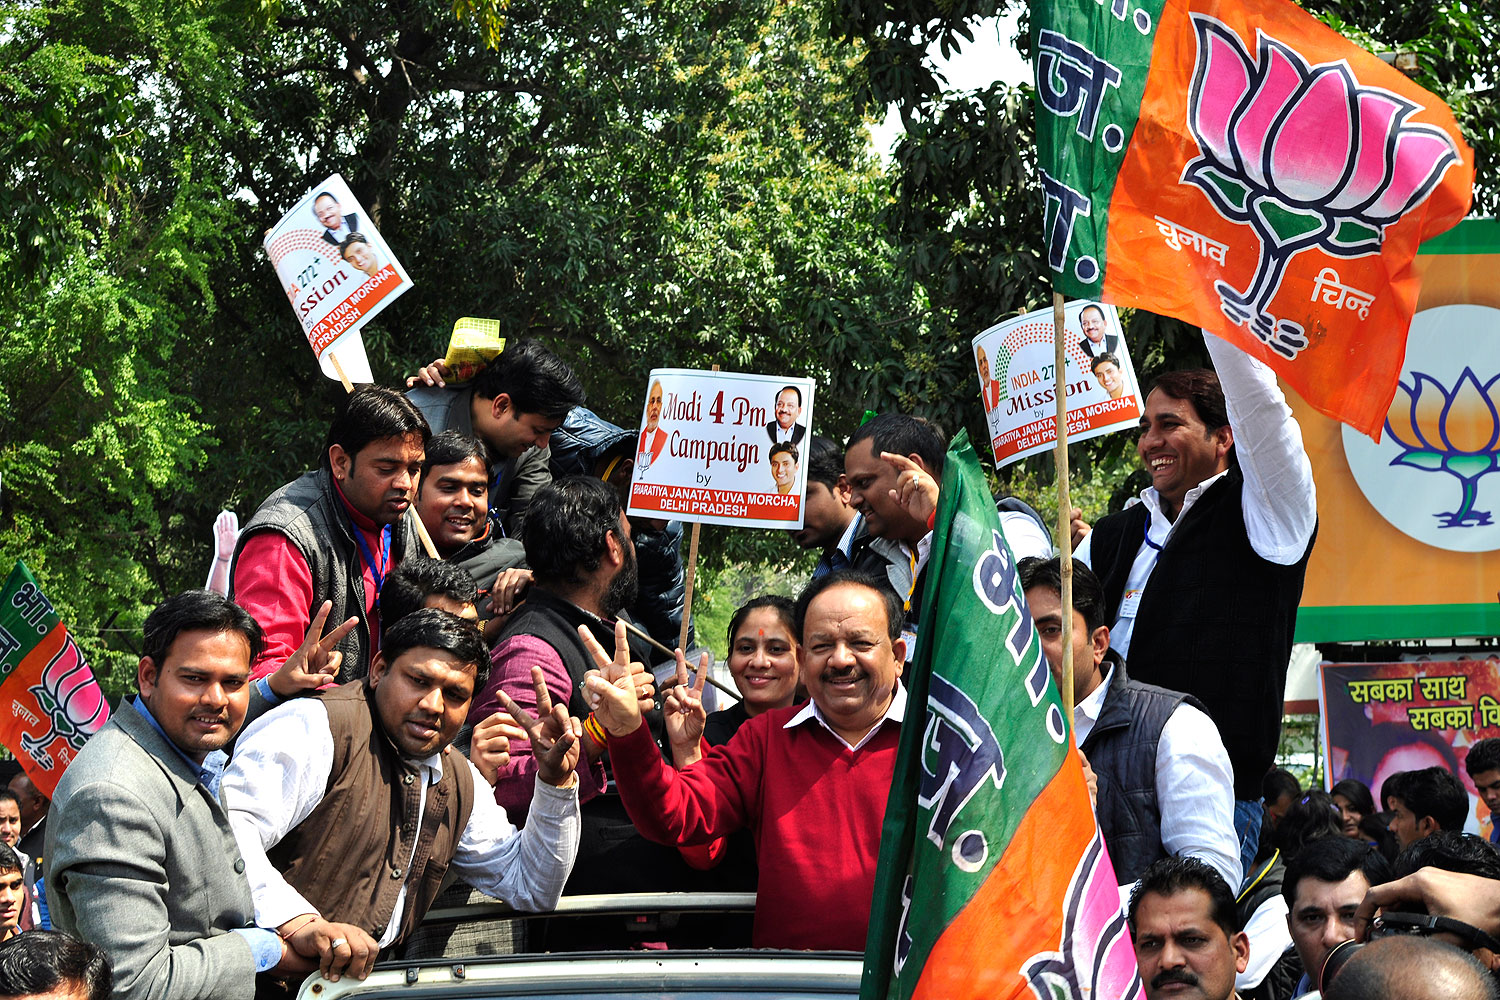 BJP Delhi president Harsh Vardhan launches a rally promoting Narendra Modi as the prime-ministerial candidate at the forthcoming Lok Sabha elections at the BJP office in New Delhi on March 4, 2014 (Hindustan Times / Getty Images)